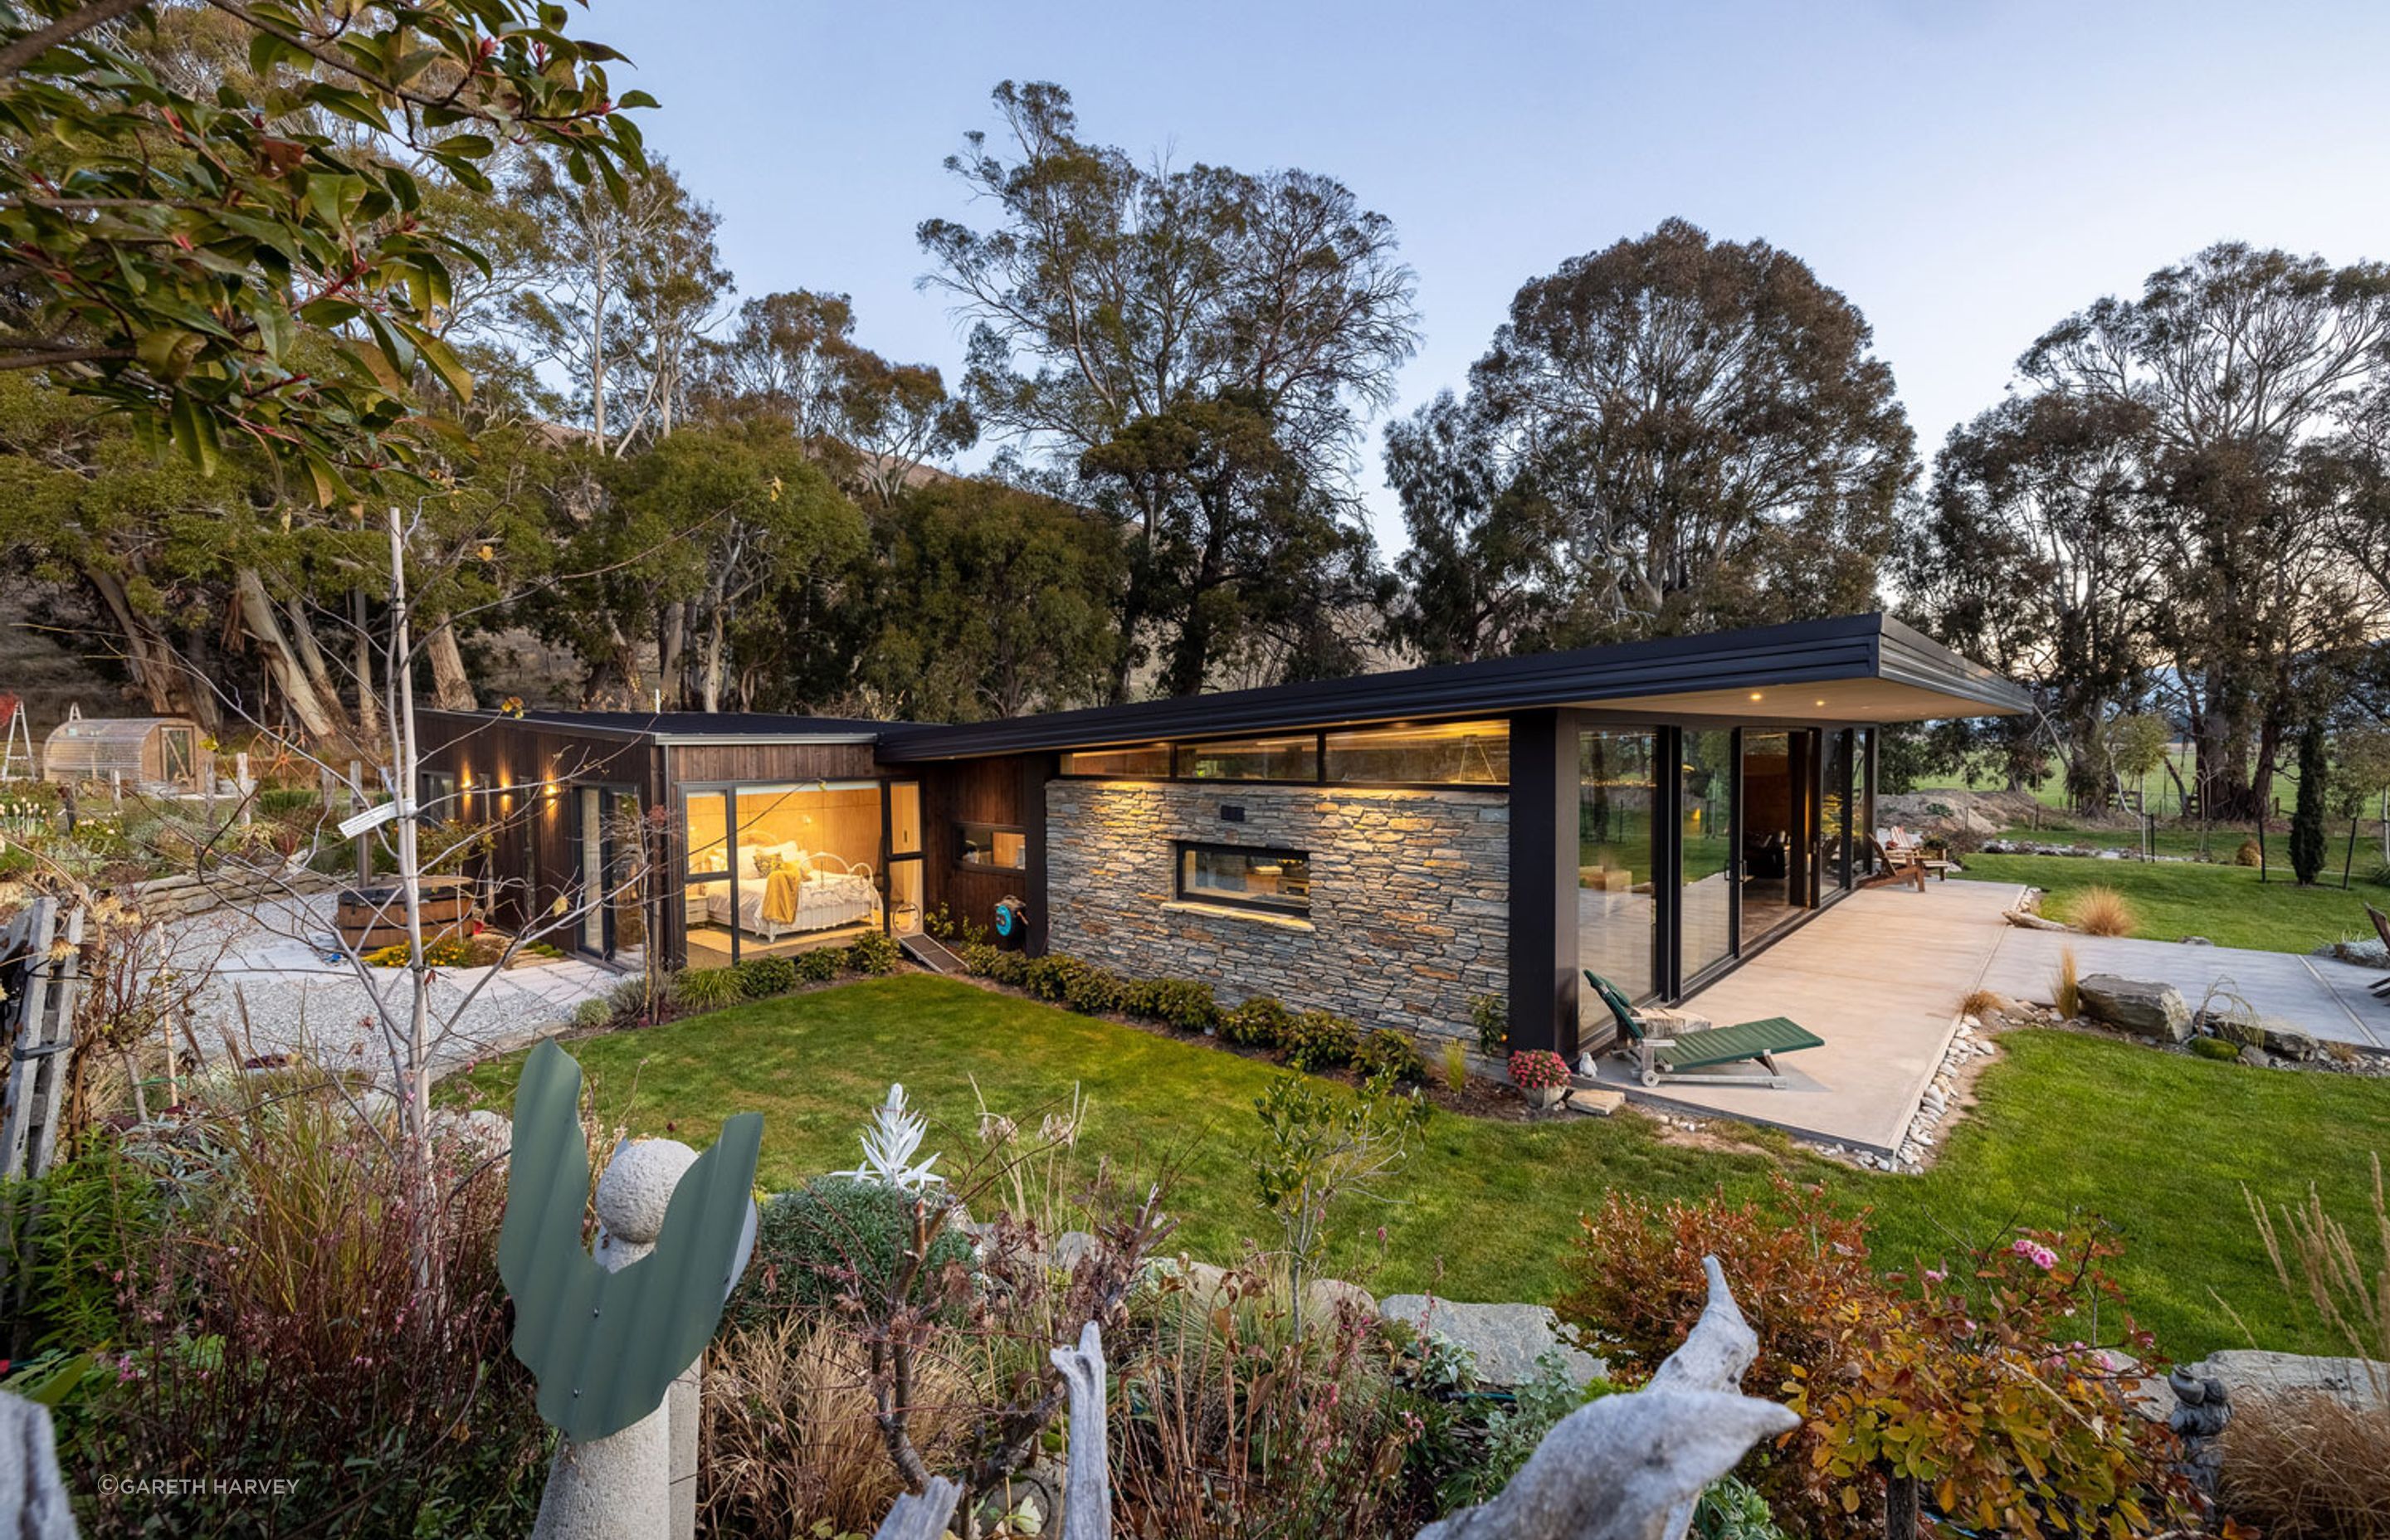 The house that Gary Todd of Gary Todd Architecture designed for friends often catches the eye of the public, he says. “It's a unique property that people notice. The owners say admirers even come up the driveway to enquire about it.”